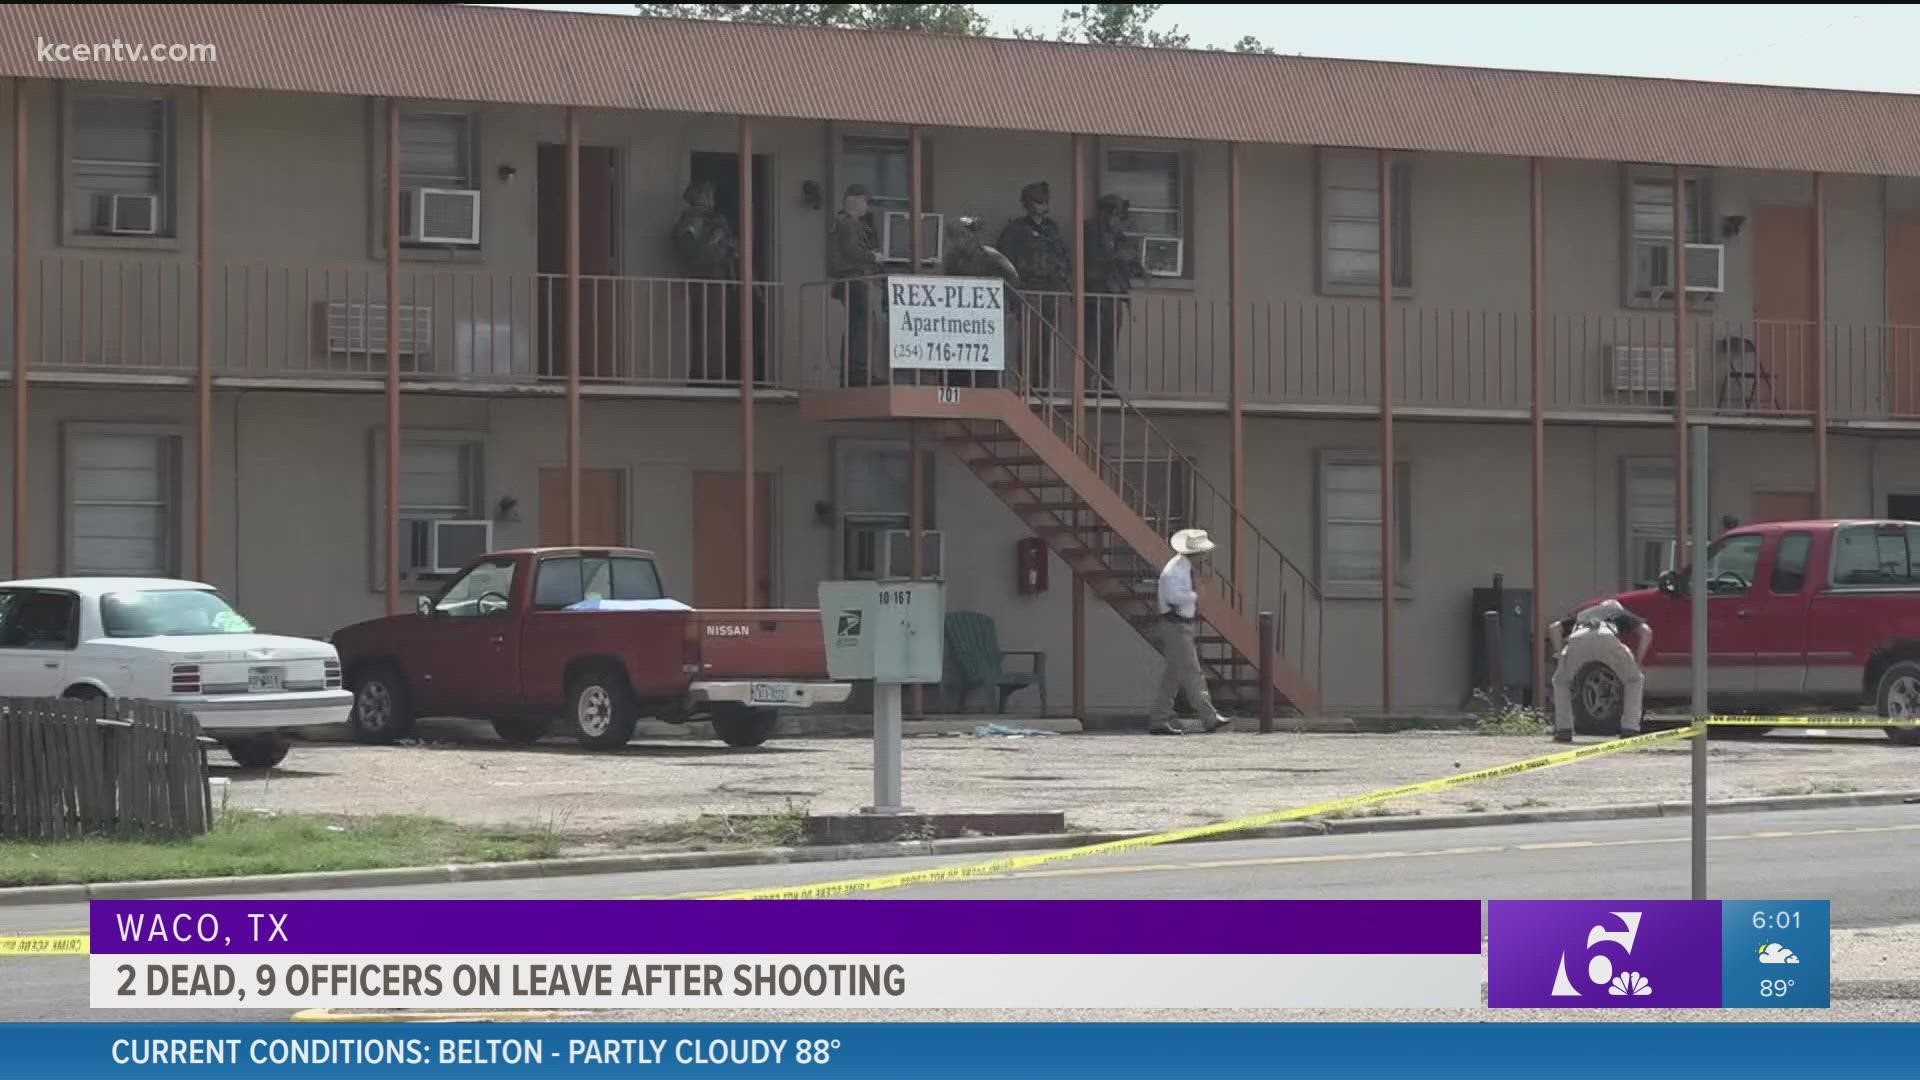 The shooting led to a SWAT situation and ended as an officer-involved shooting.